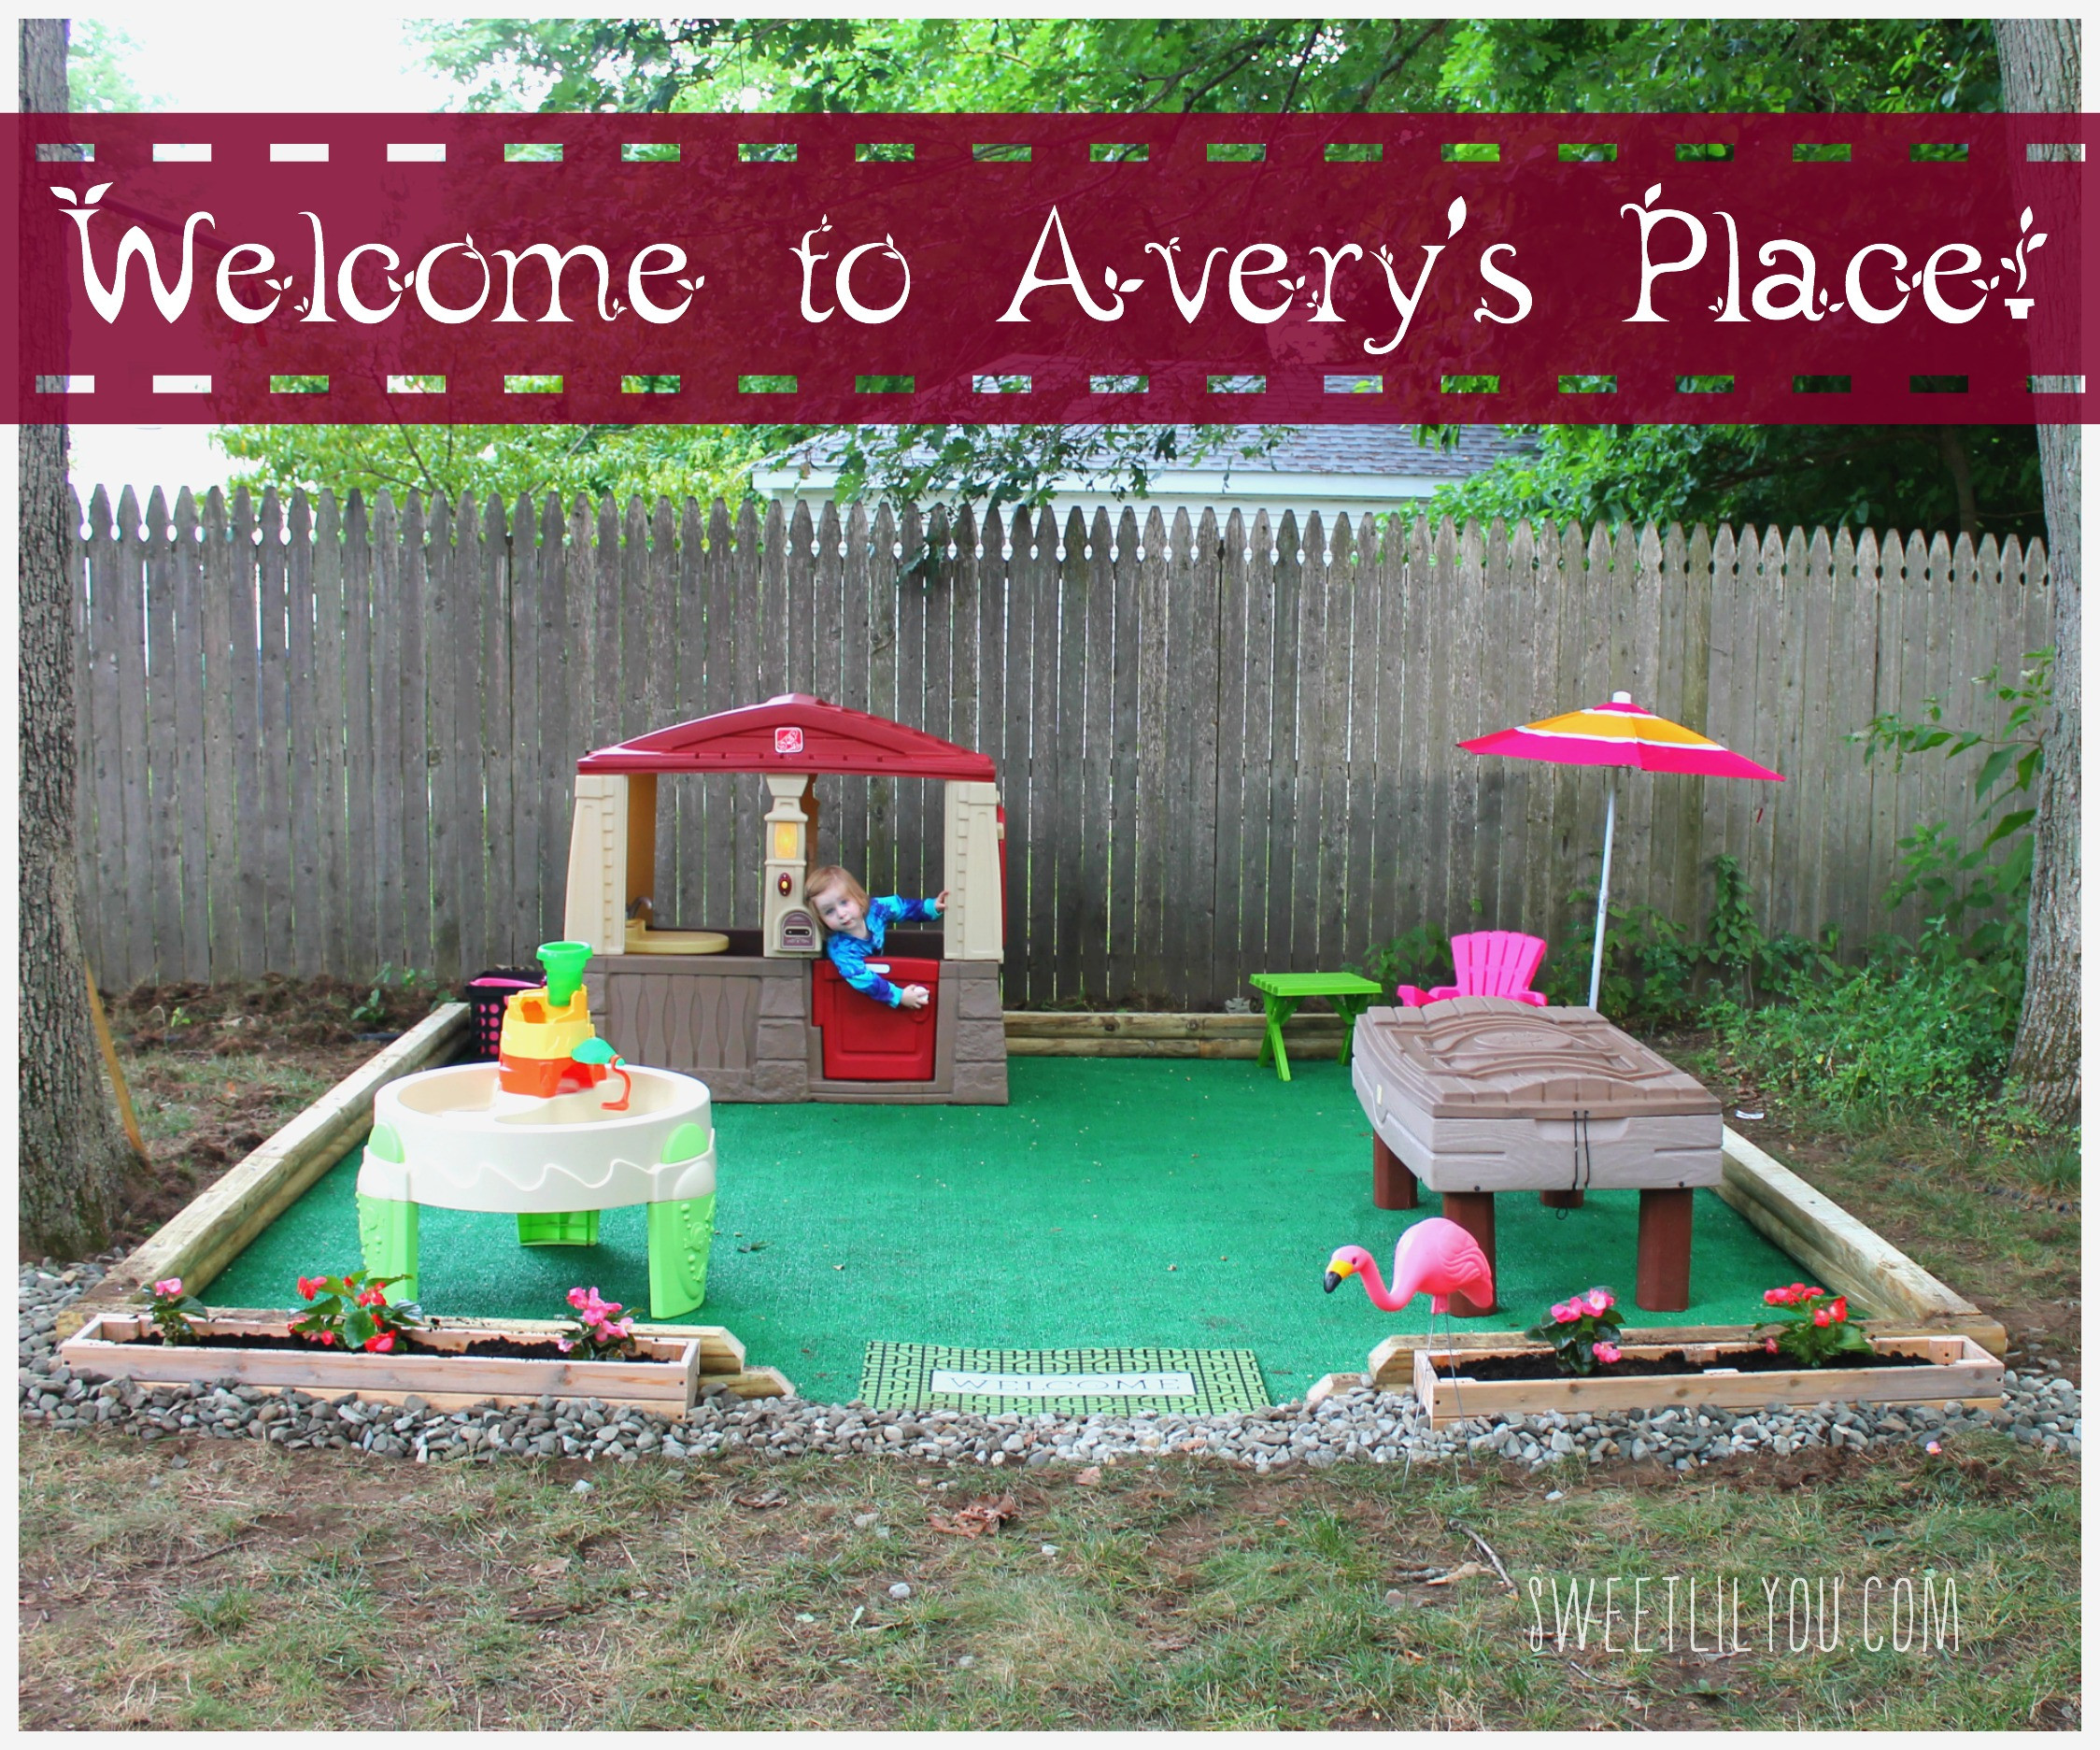 DIY Kids Outdoor Play Area
 DIY Outdoor Play Space Avery s Place sweet lil you